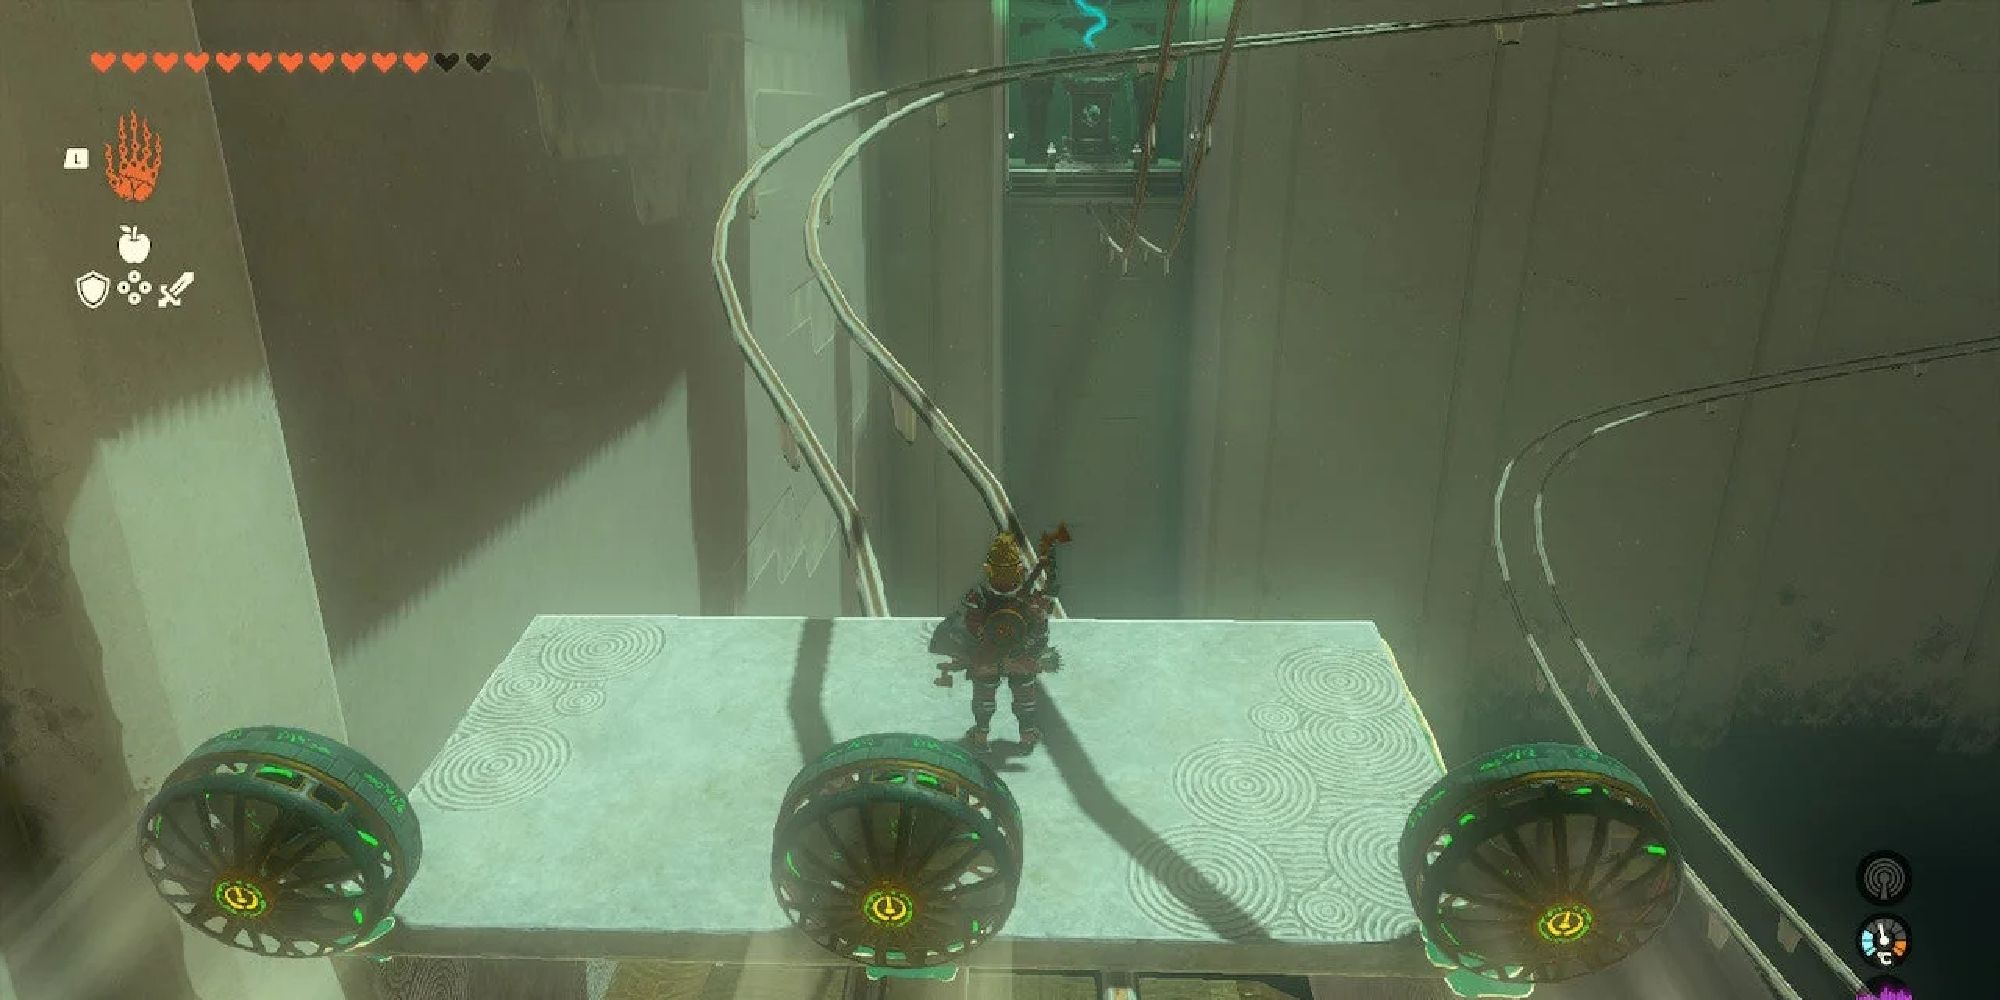 Link standing on a platform on rails, three fans propelling him forward.